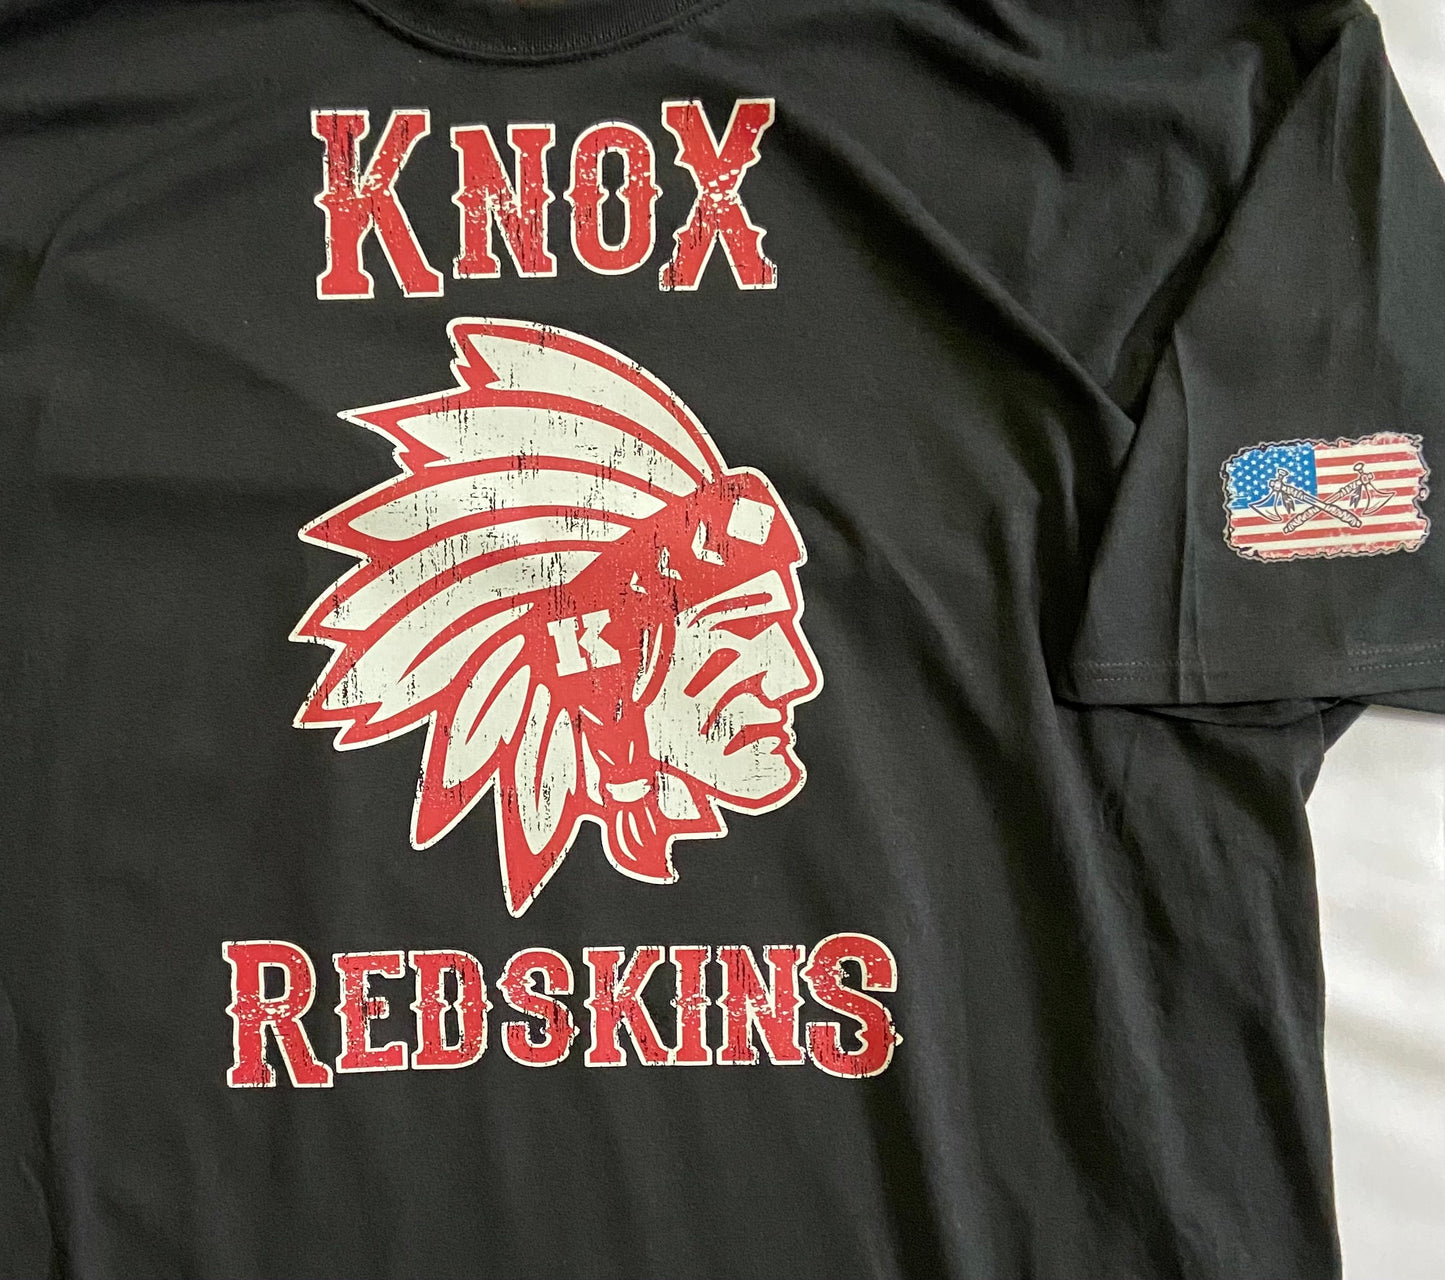 Knox Redskins Logo T-Shirt - Black Gray or White - Adult and Youth Kid's sizes